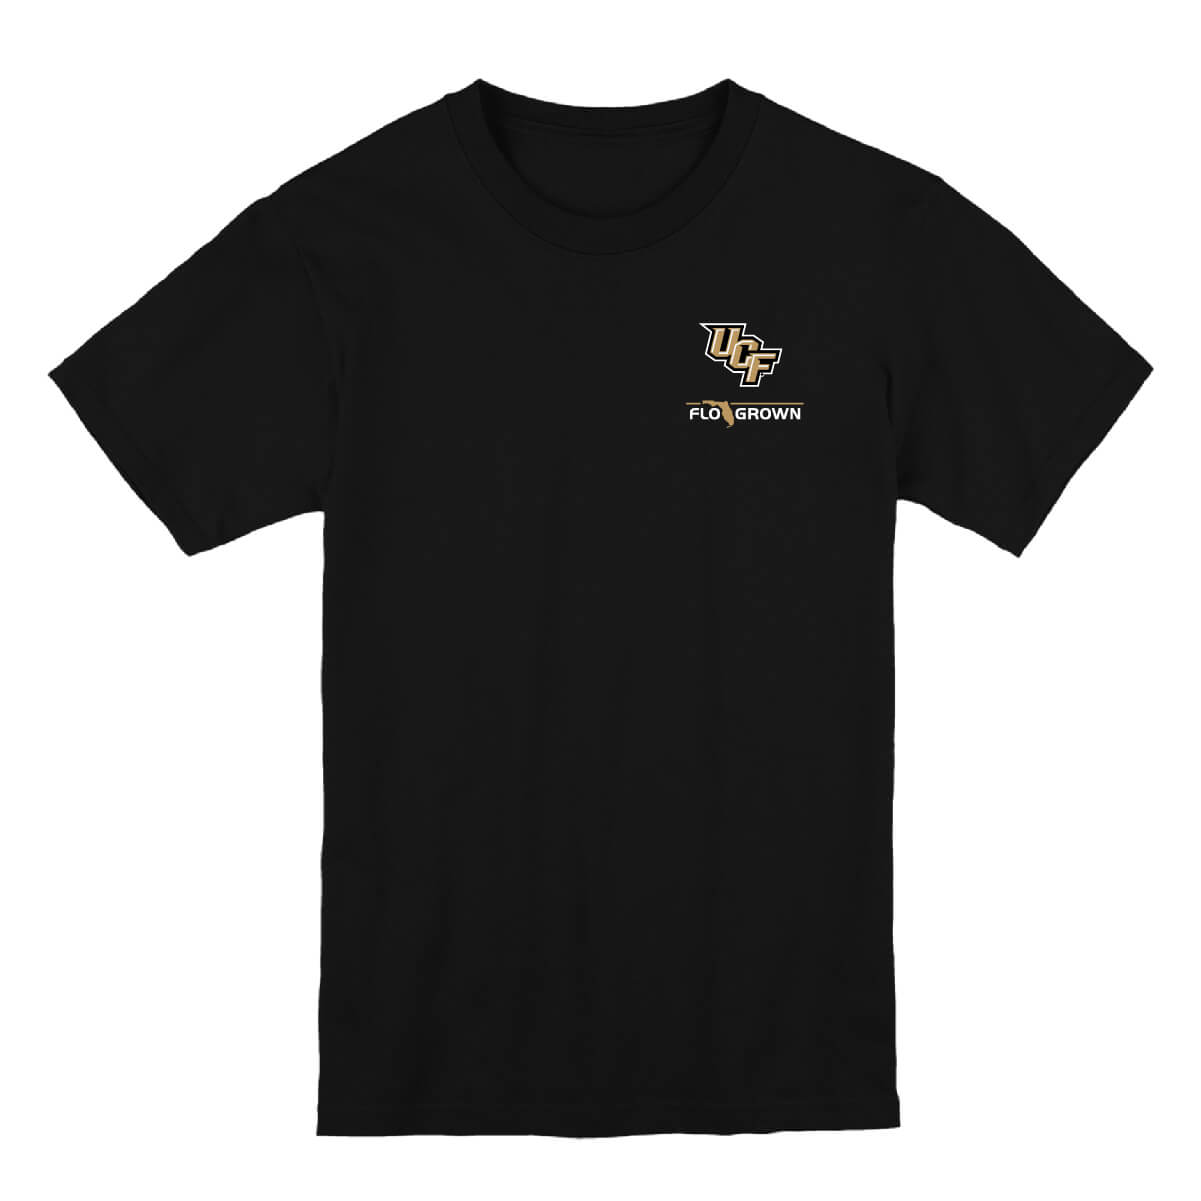 UCF Knights Truck Country Youth Tee